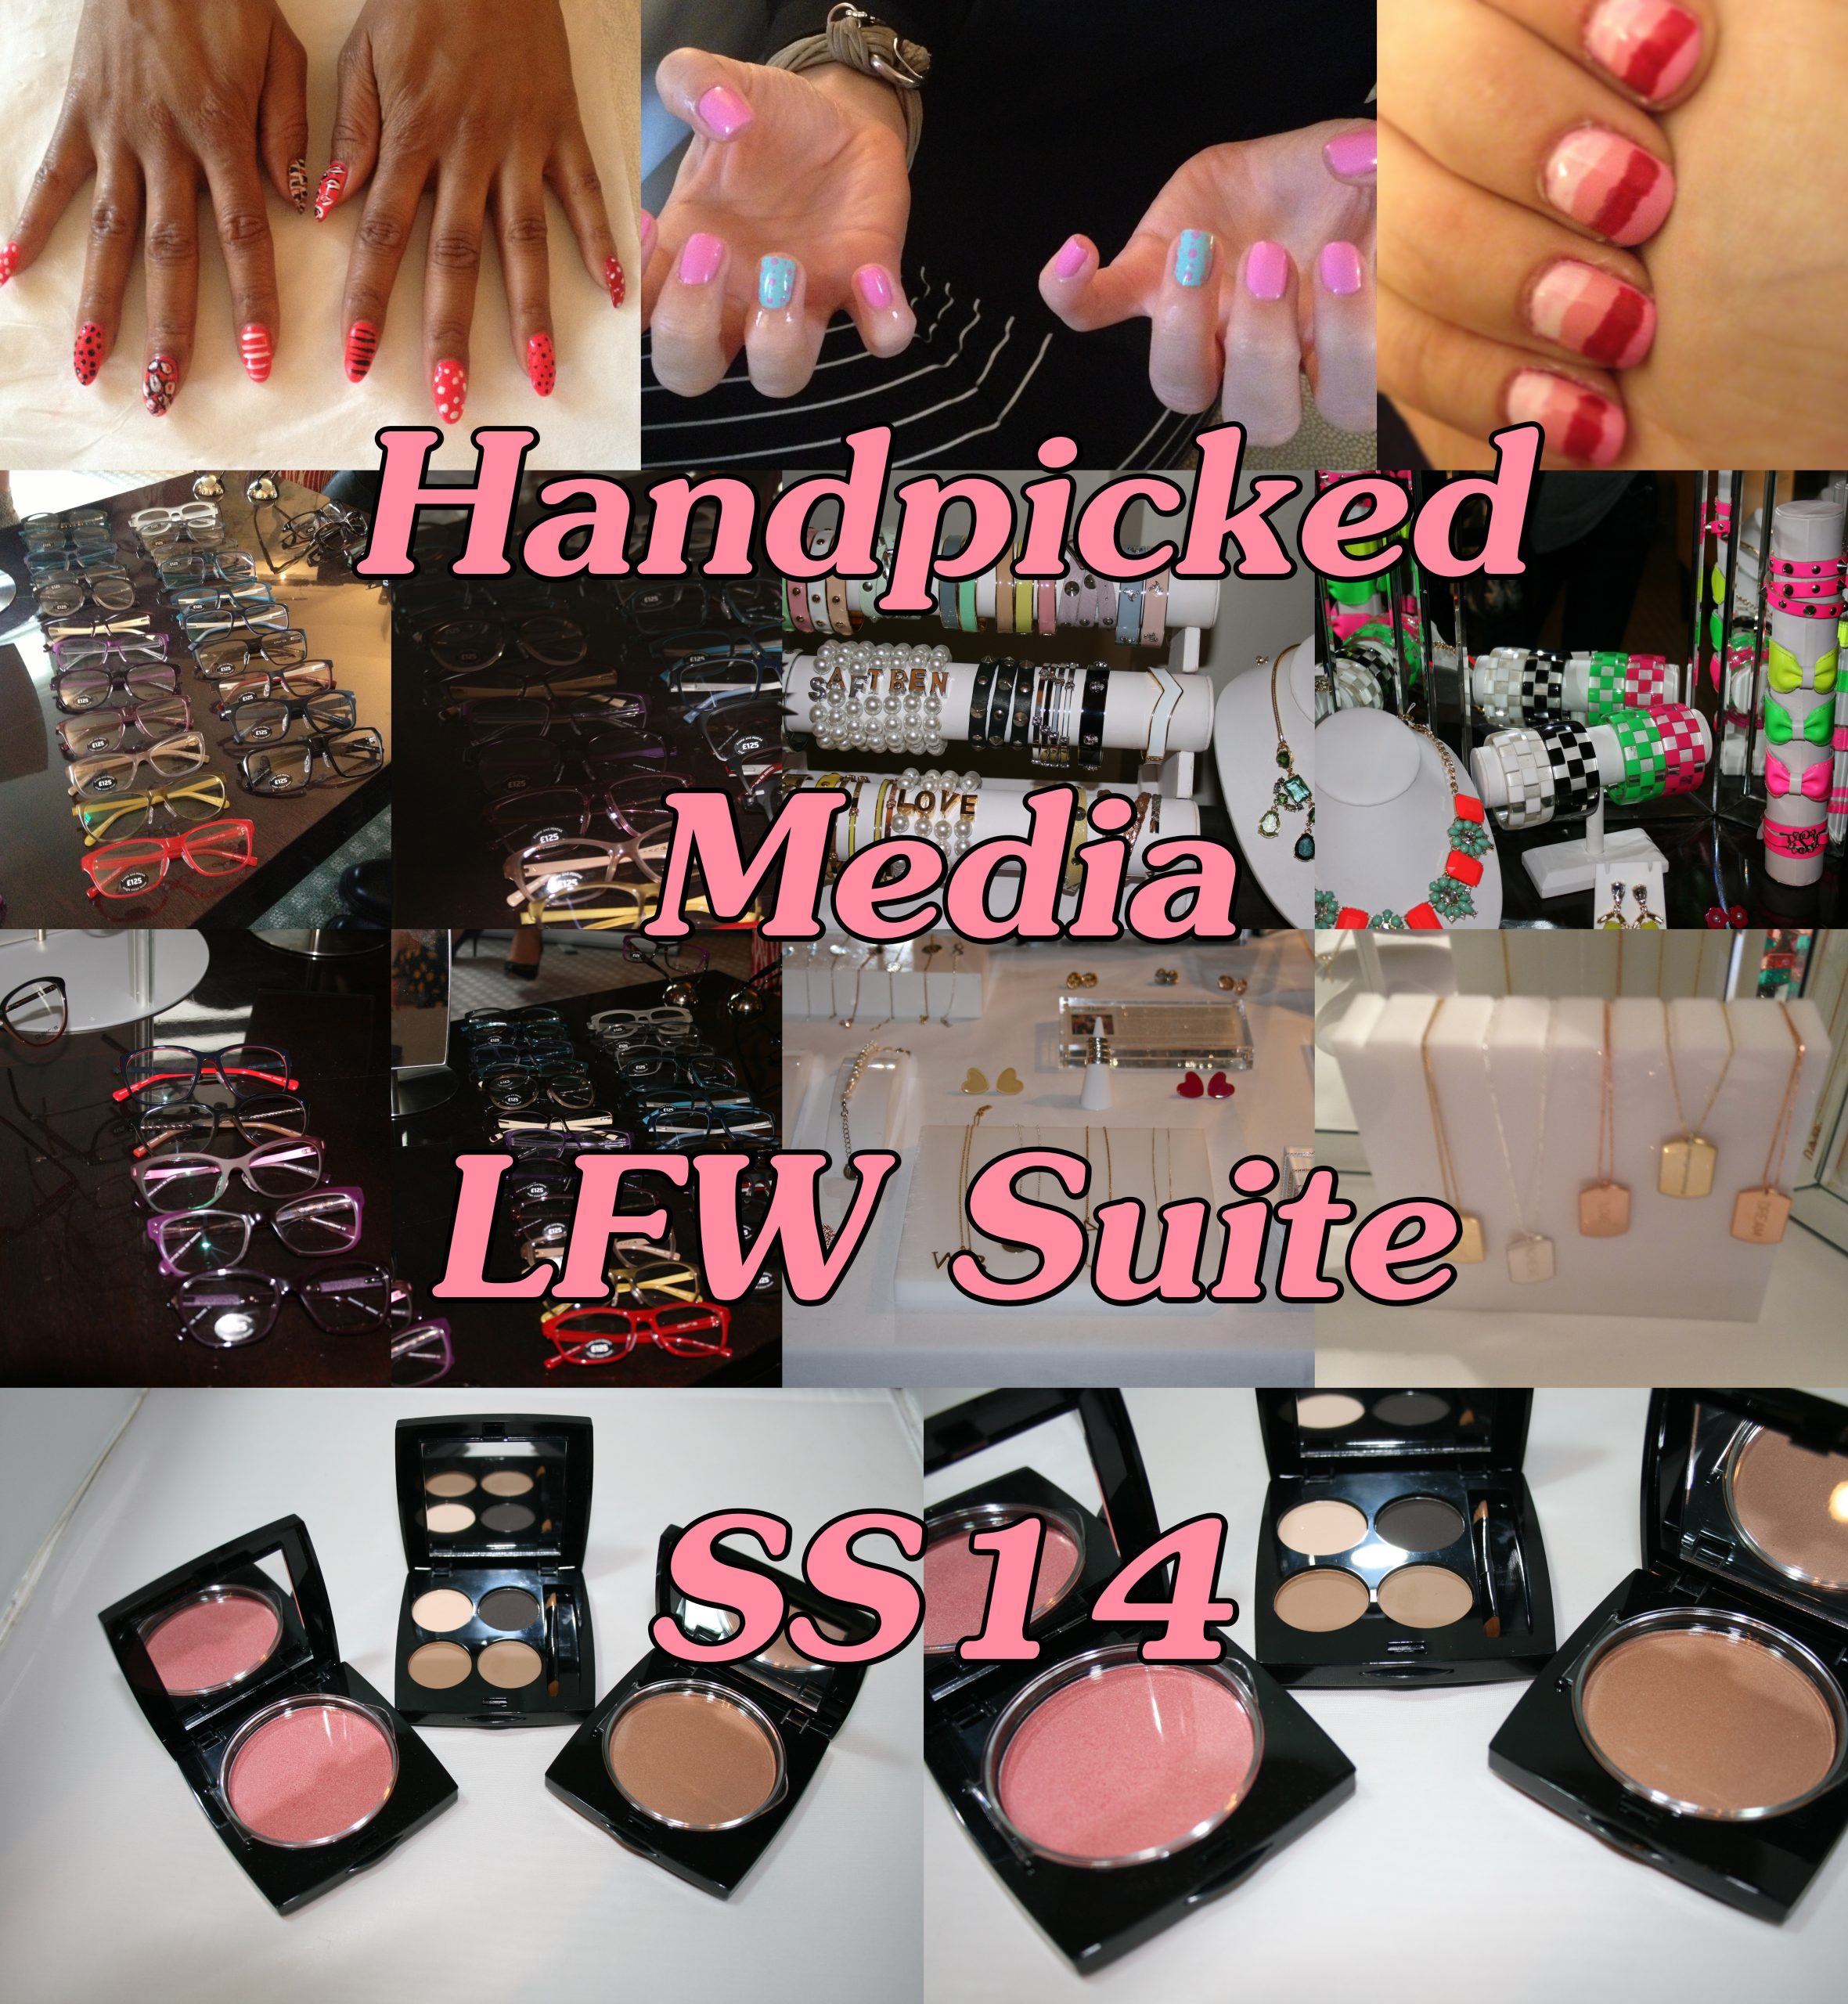 My Visit to the Handpicked Media LFW Suite